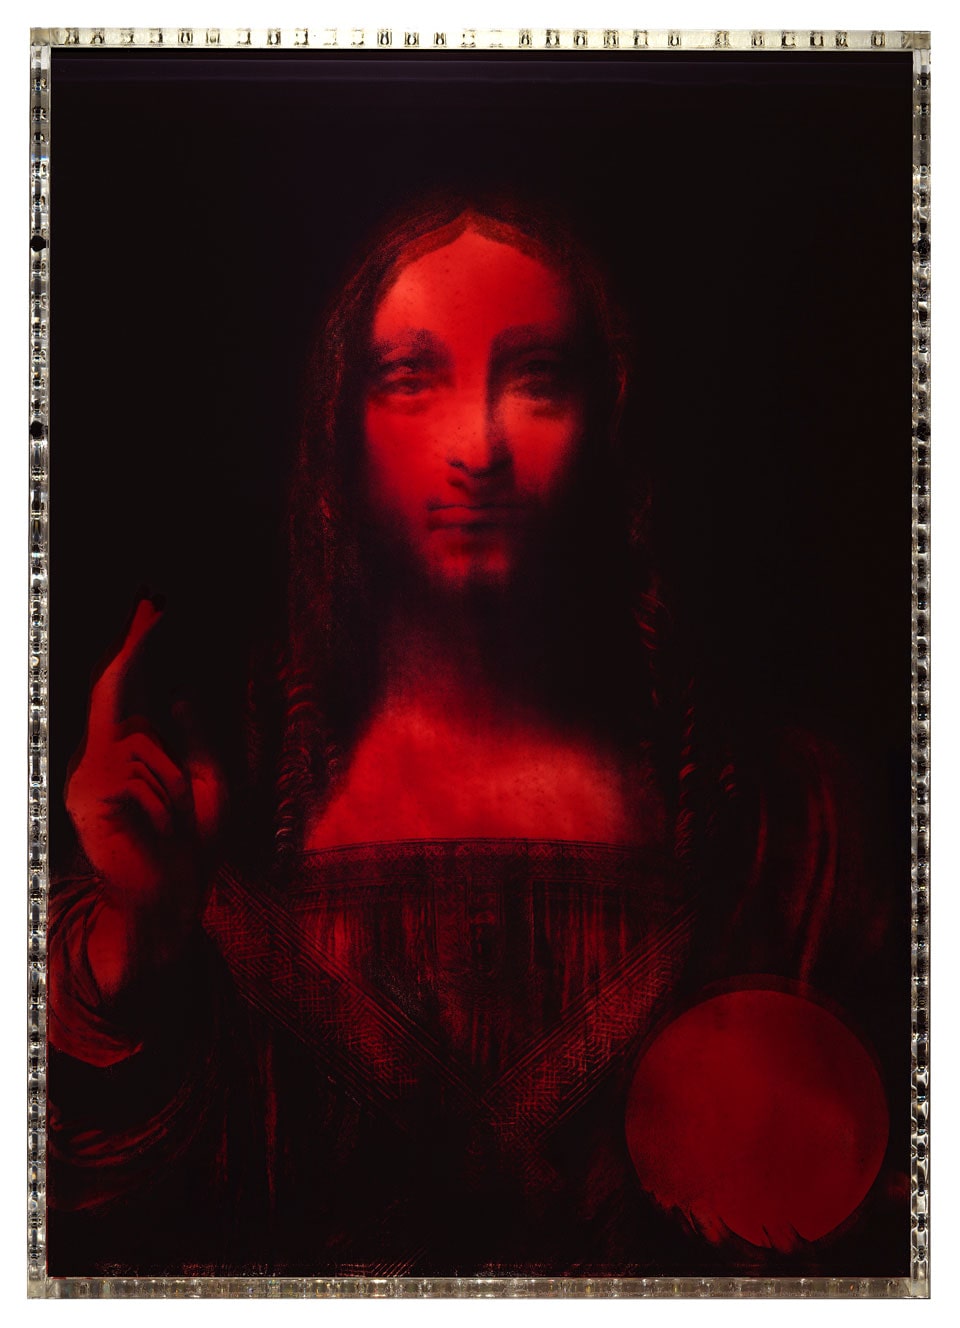 An artwork by Jordan Eagles titled Vinci, dated 2018, featuring a grayscale image of the painting Salvator Mundi printed on plexiglass and painted with the blood of an HIV+ undetectable long-term survivor and activist